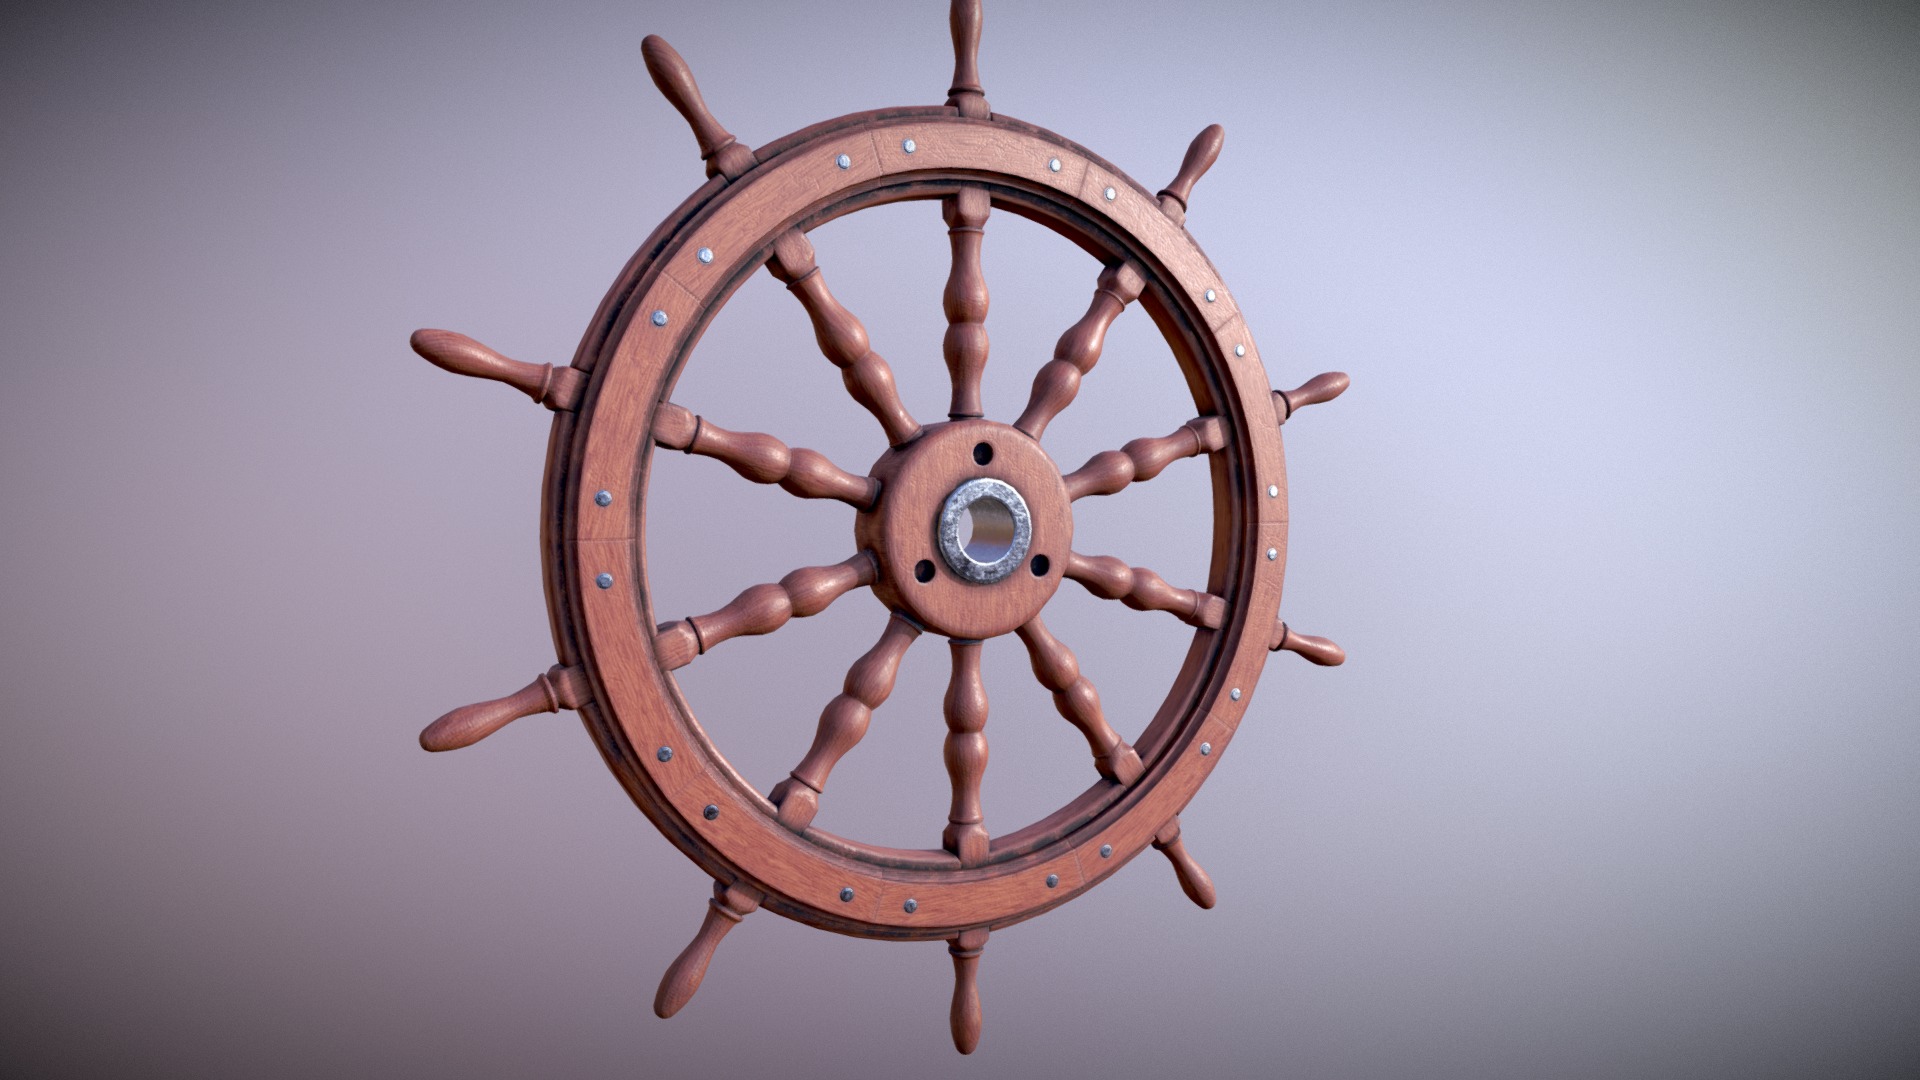 3D model Hand Wheel of ships PBR low poly - This is a 3D model of the Hand Wheel of ships PBR low poly. The 3D model is about a wooden wheel with a round metal rim.